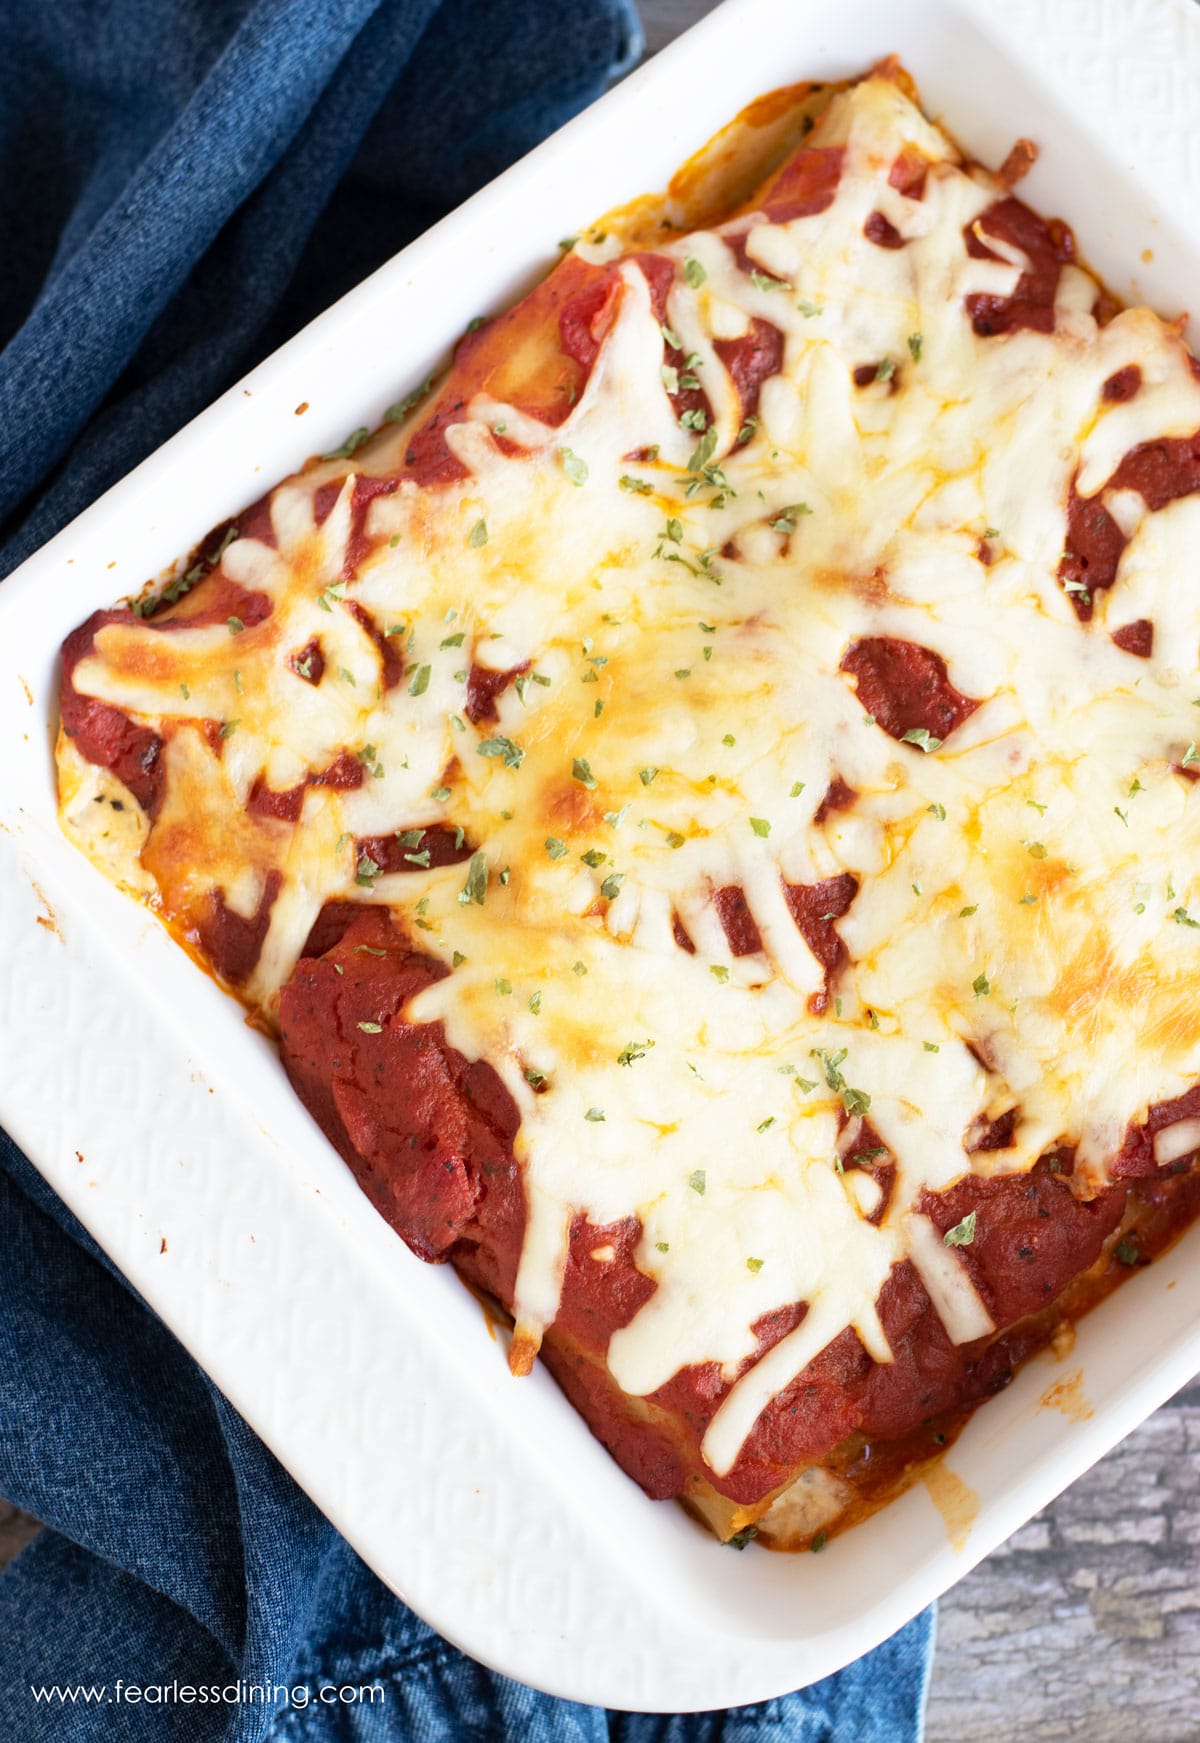 An 8x8 white baking dish filled with baked manicotti